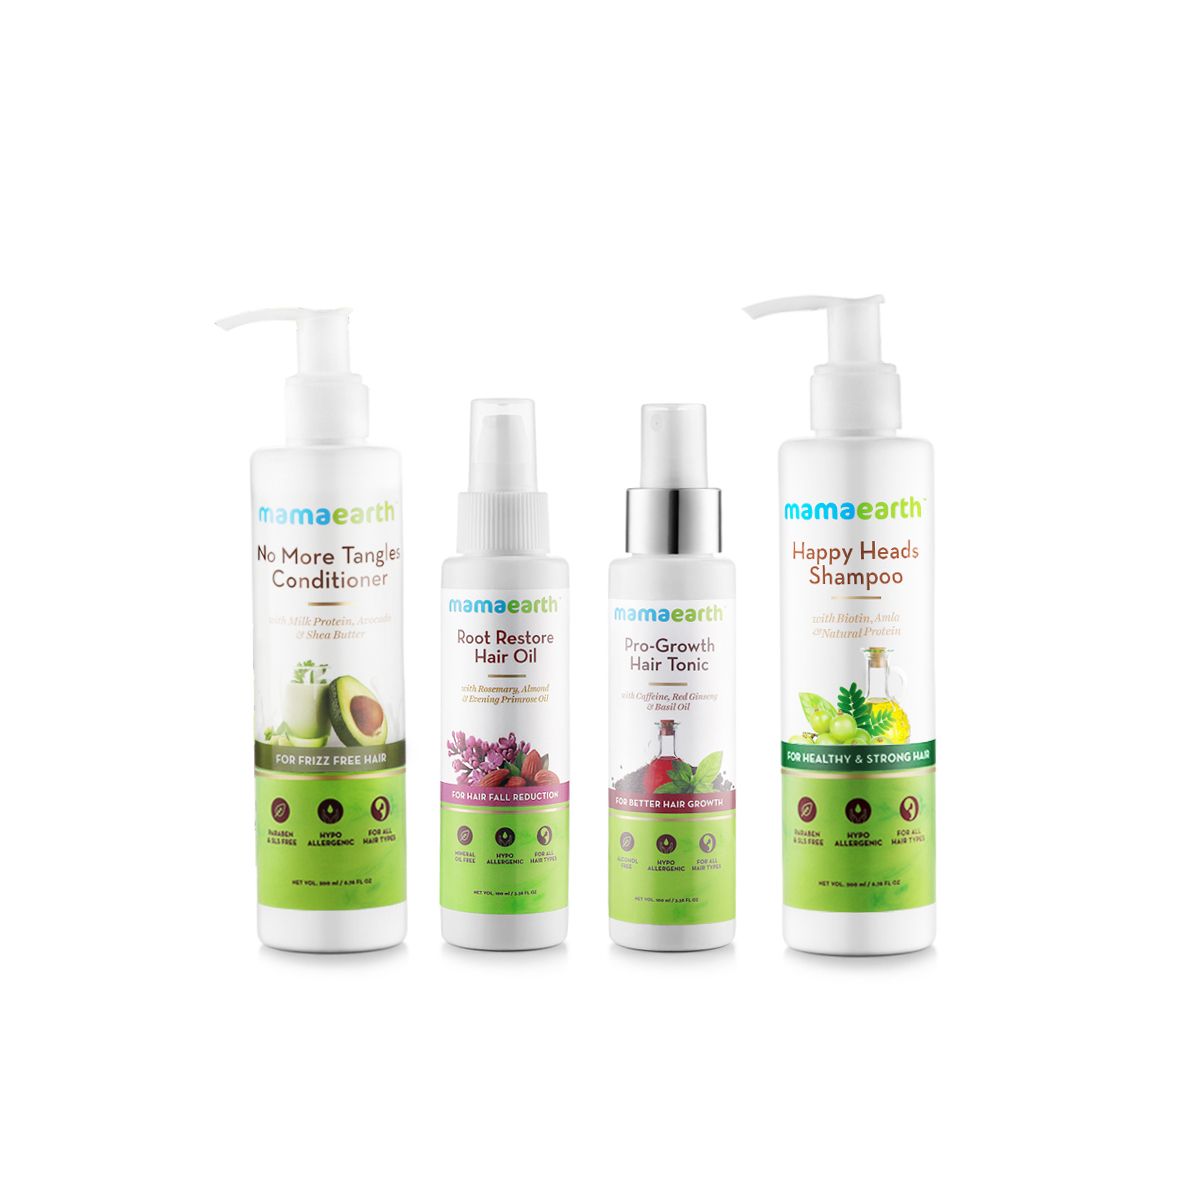 Mamaearth Anti Hair Fall Kit Better Than Others Available In the Market